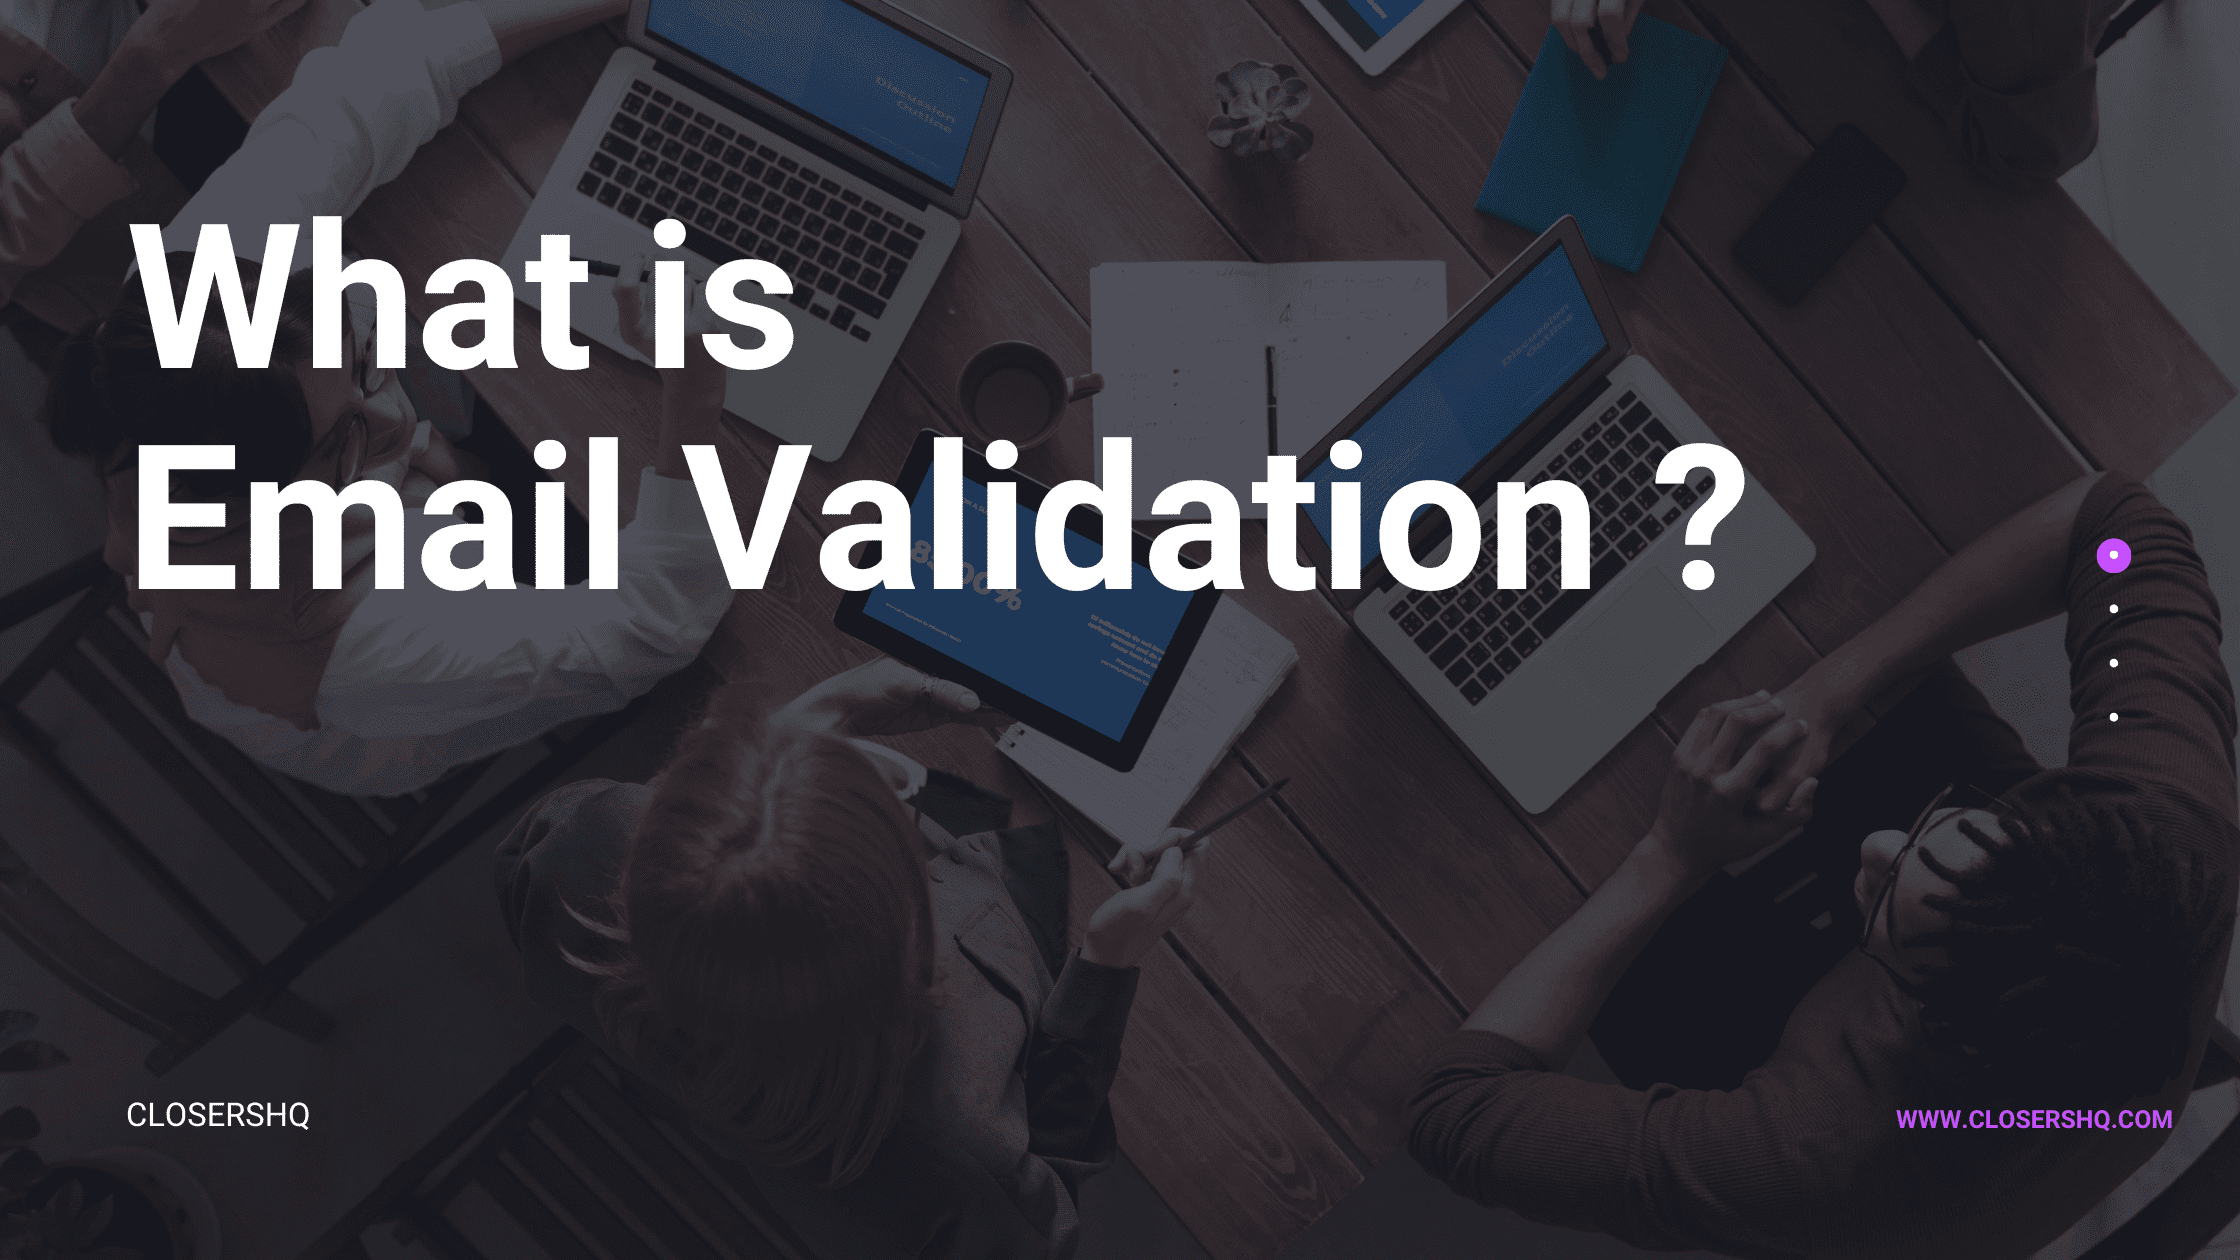 What is Email Validation?